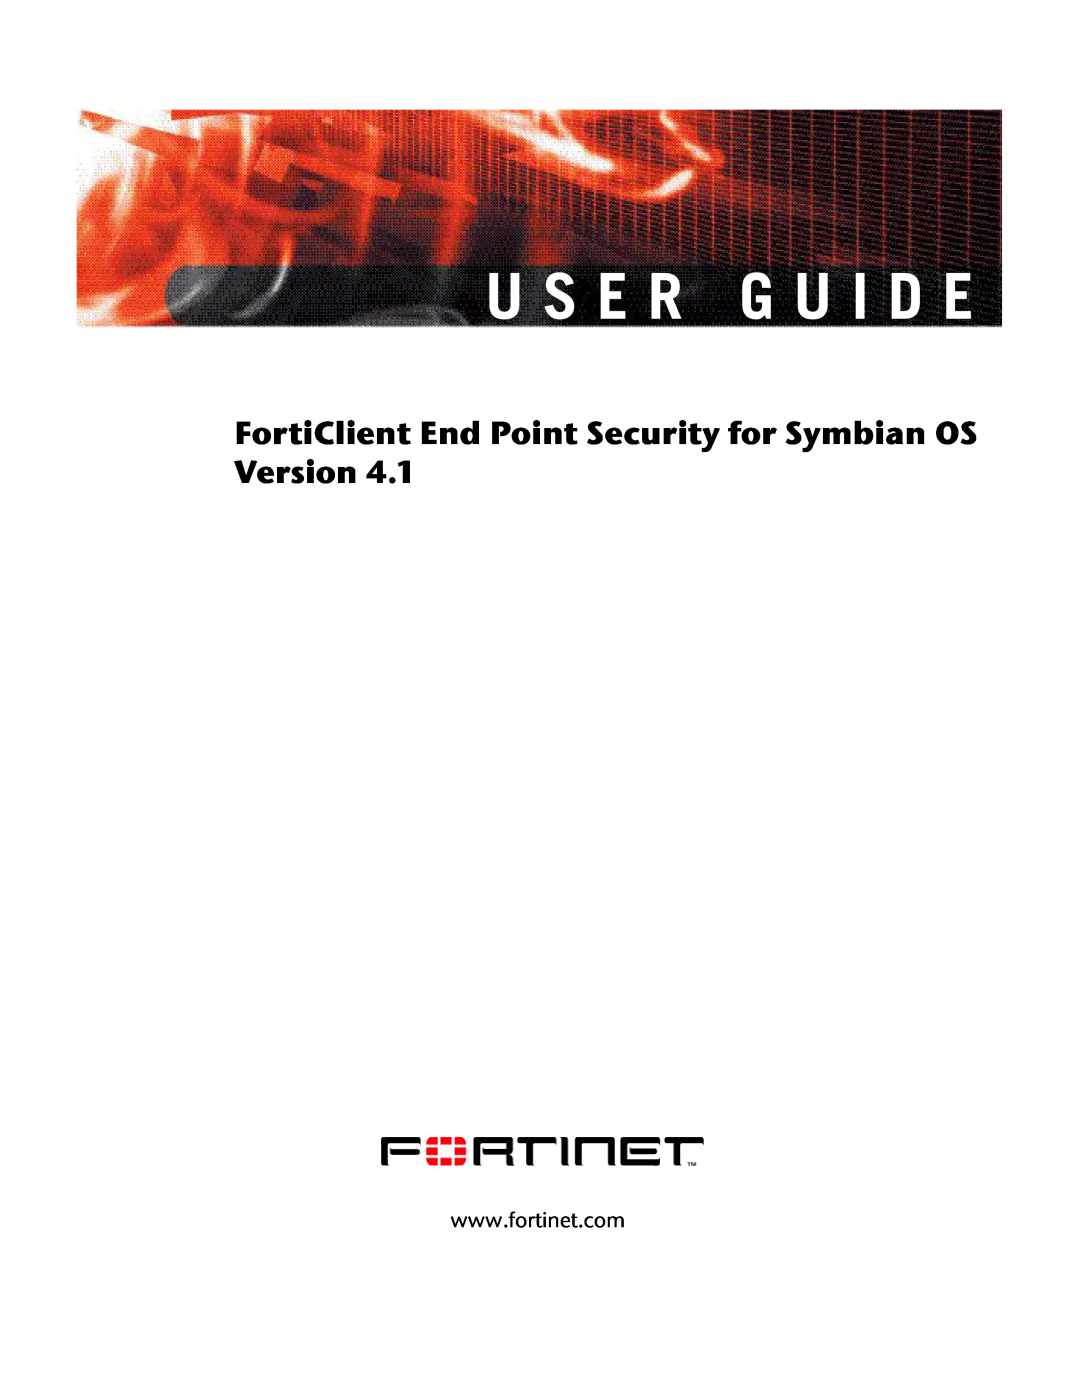 Fortinet Version 4.1 manual FortiClient End Point Security for Symbian OS Version, U S E R G U I D E 